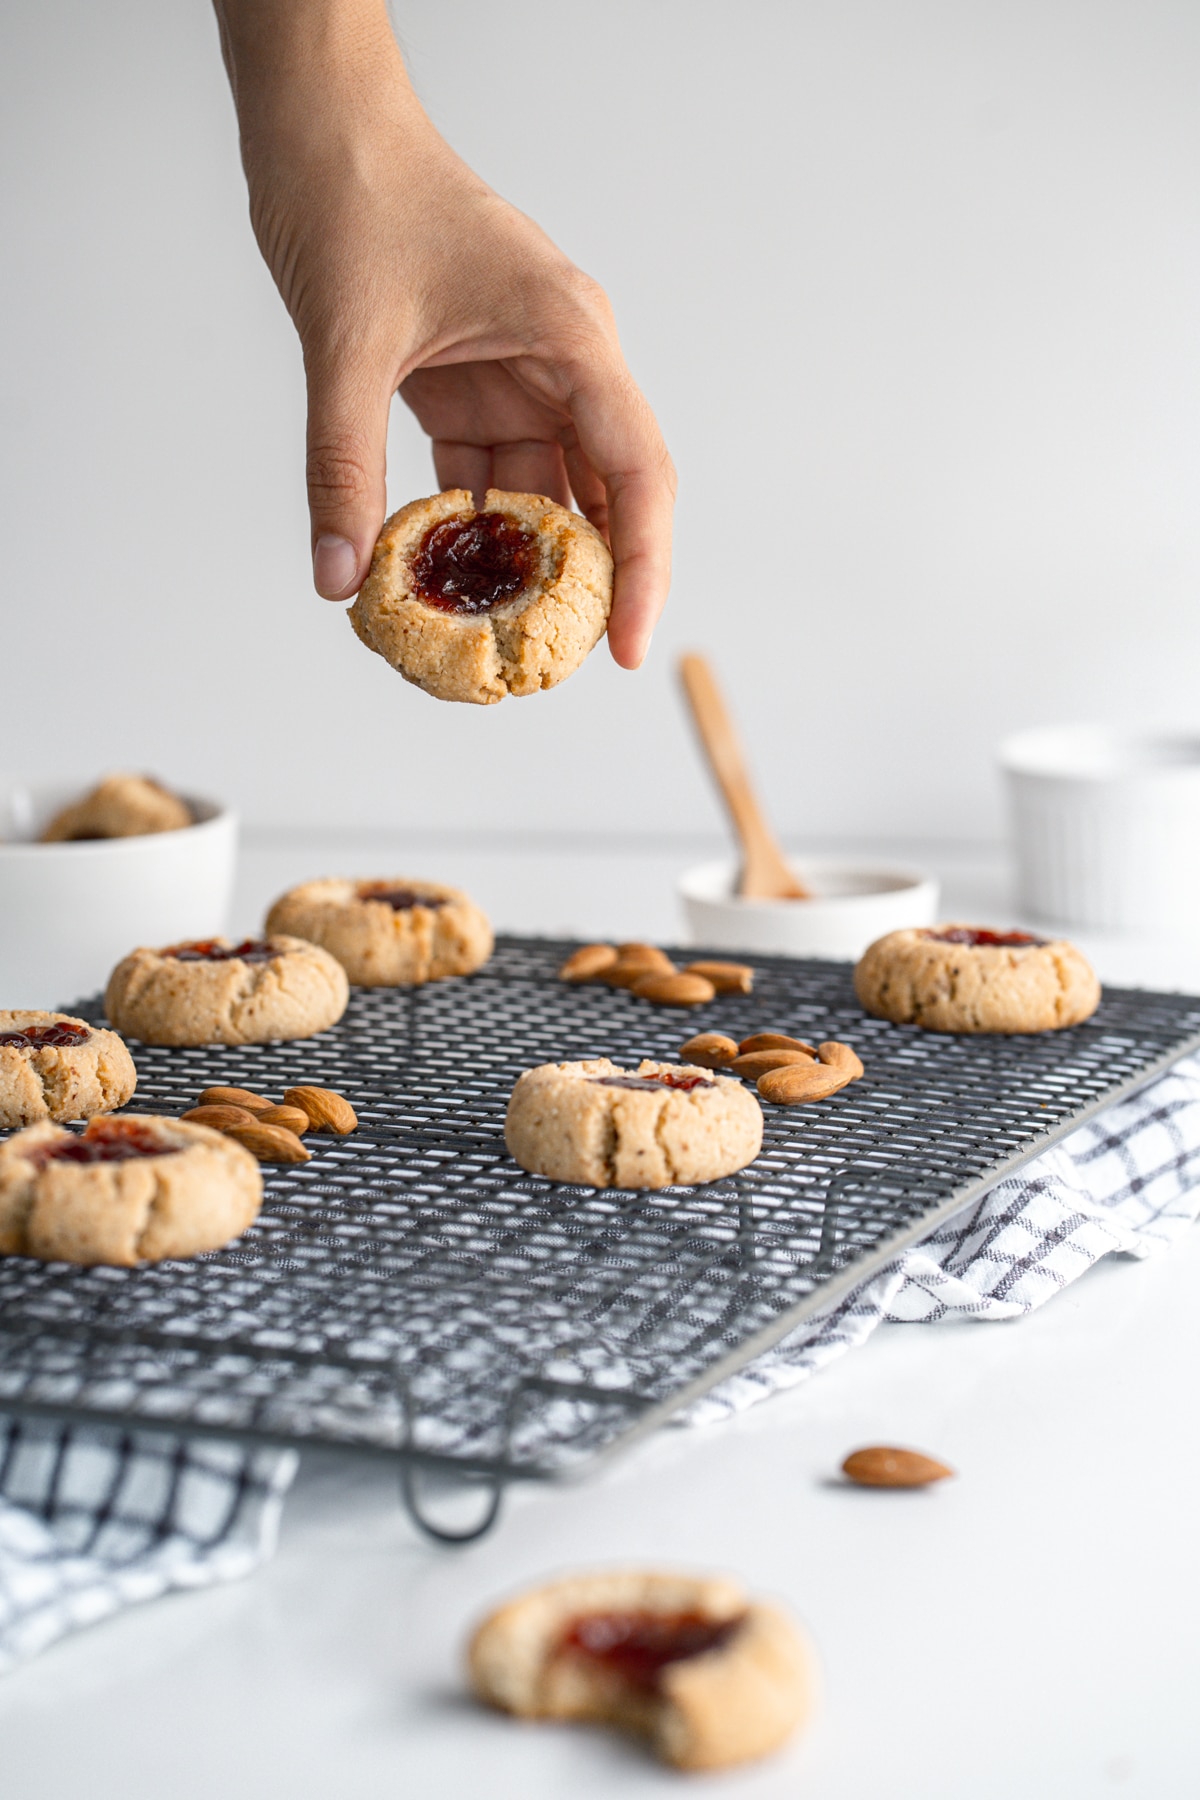 Almond flour thumbprint cookies on a wire rack with almonds scattered on the rack and a hand picking up one cookie.